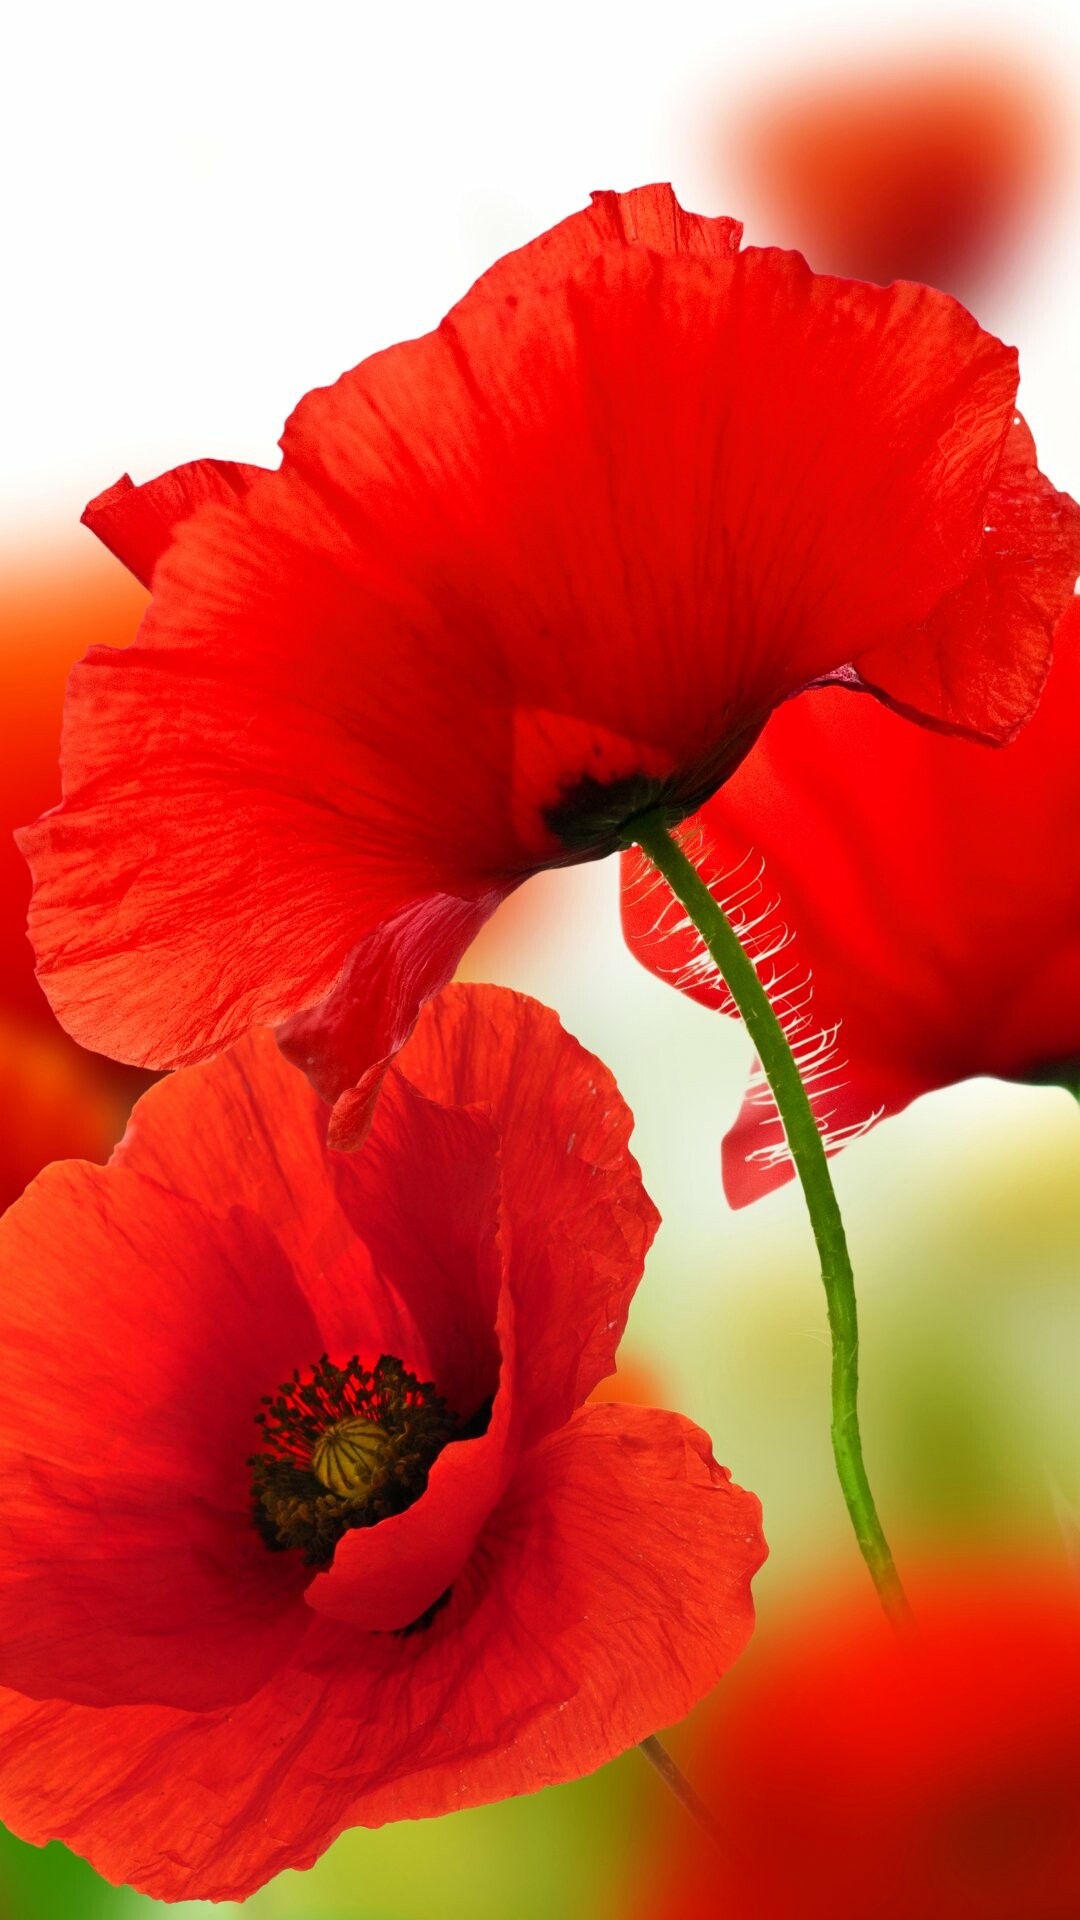 Poppy Flower: A plant with an ancient cultivation history, Papaveraceae. 1080x1920 Full HD Wallpaper.